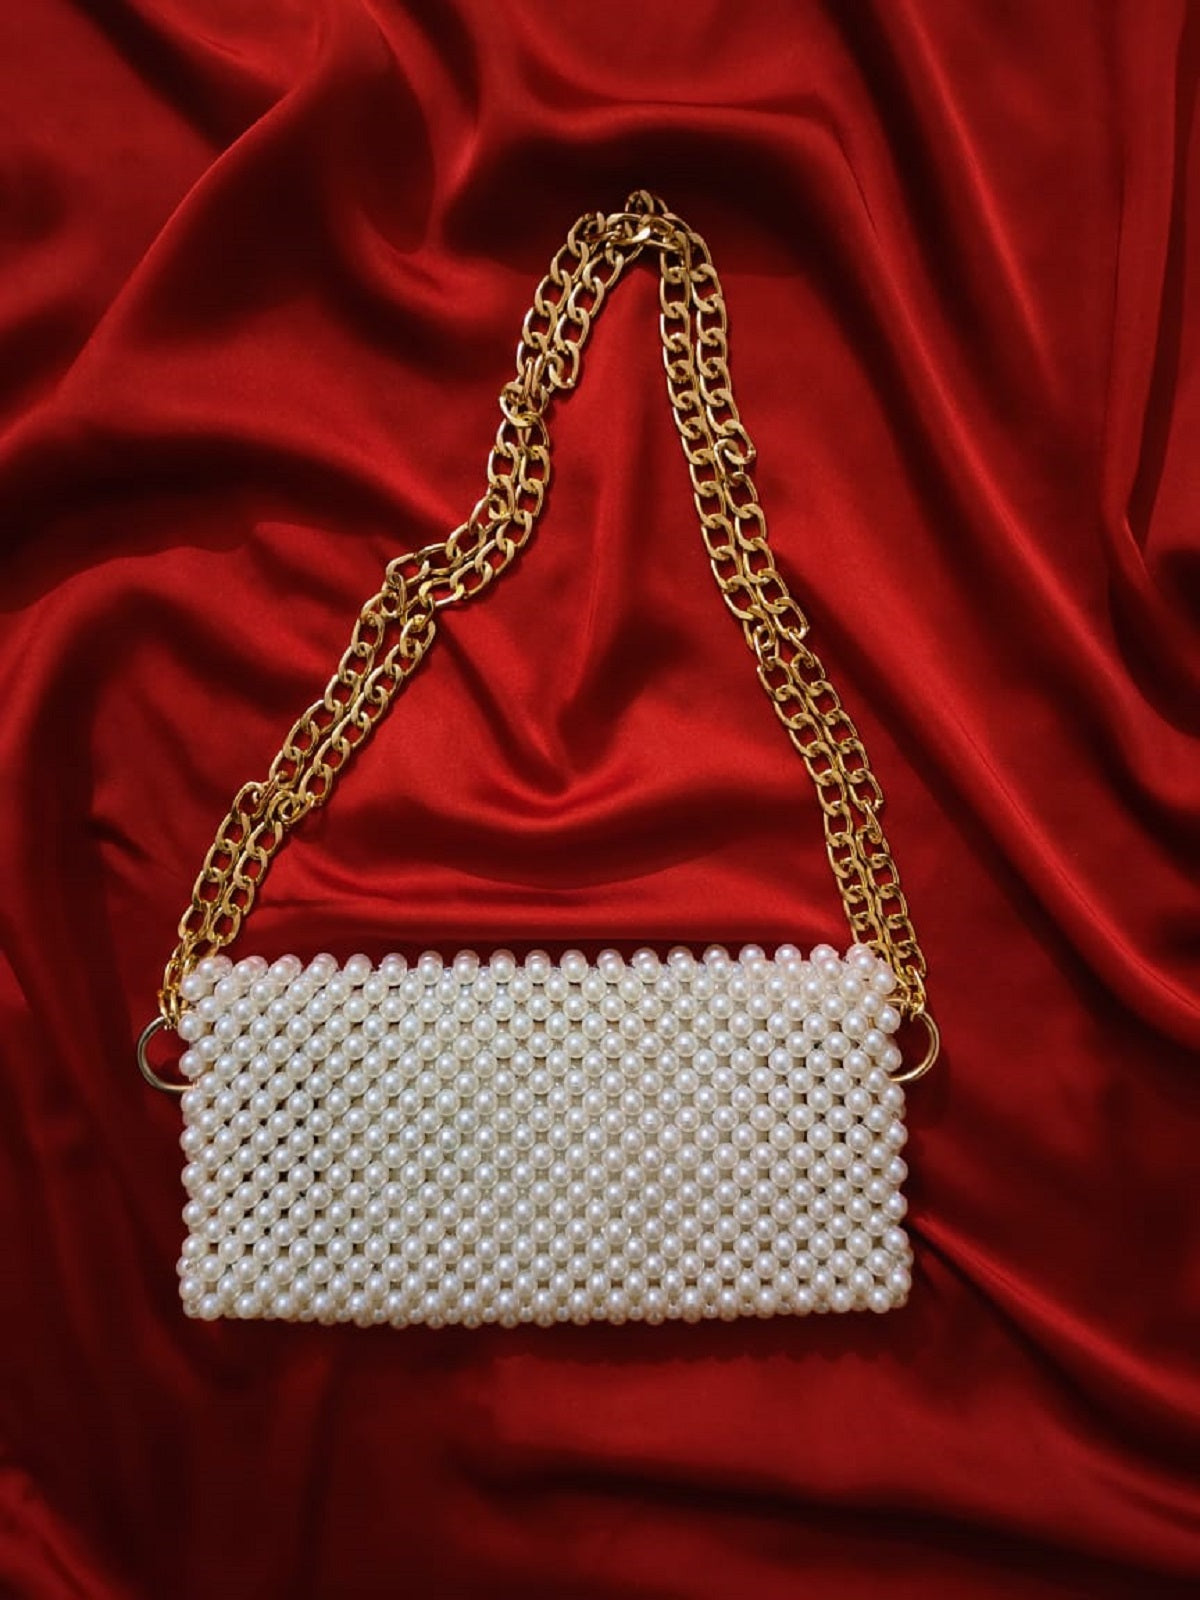 Interior view of the beaded shoulder bag, revealing its spacious and well-crafted design